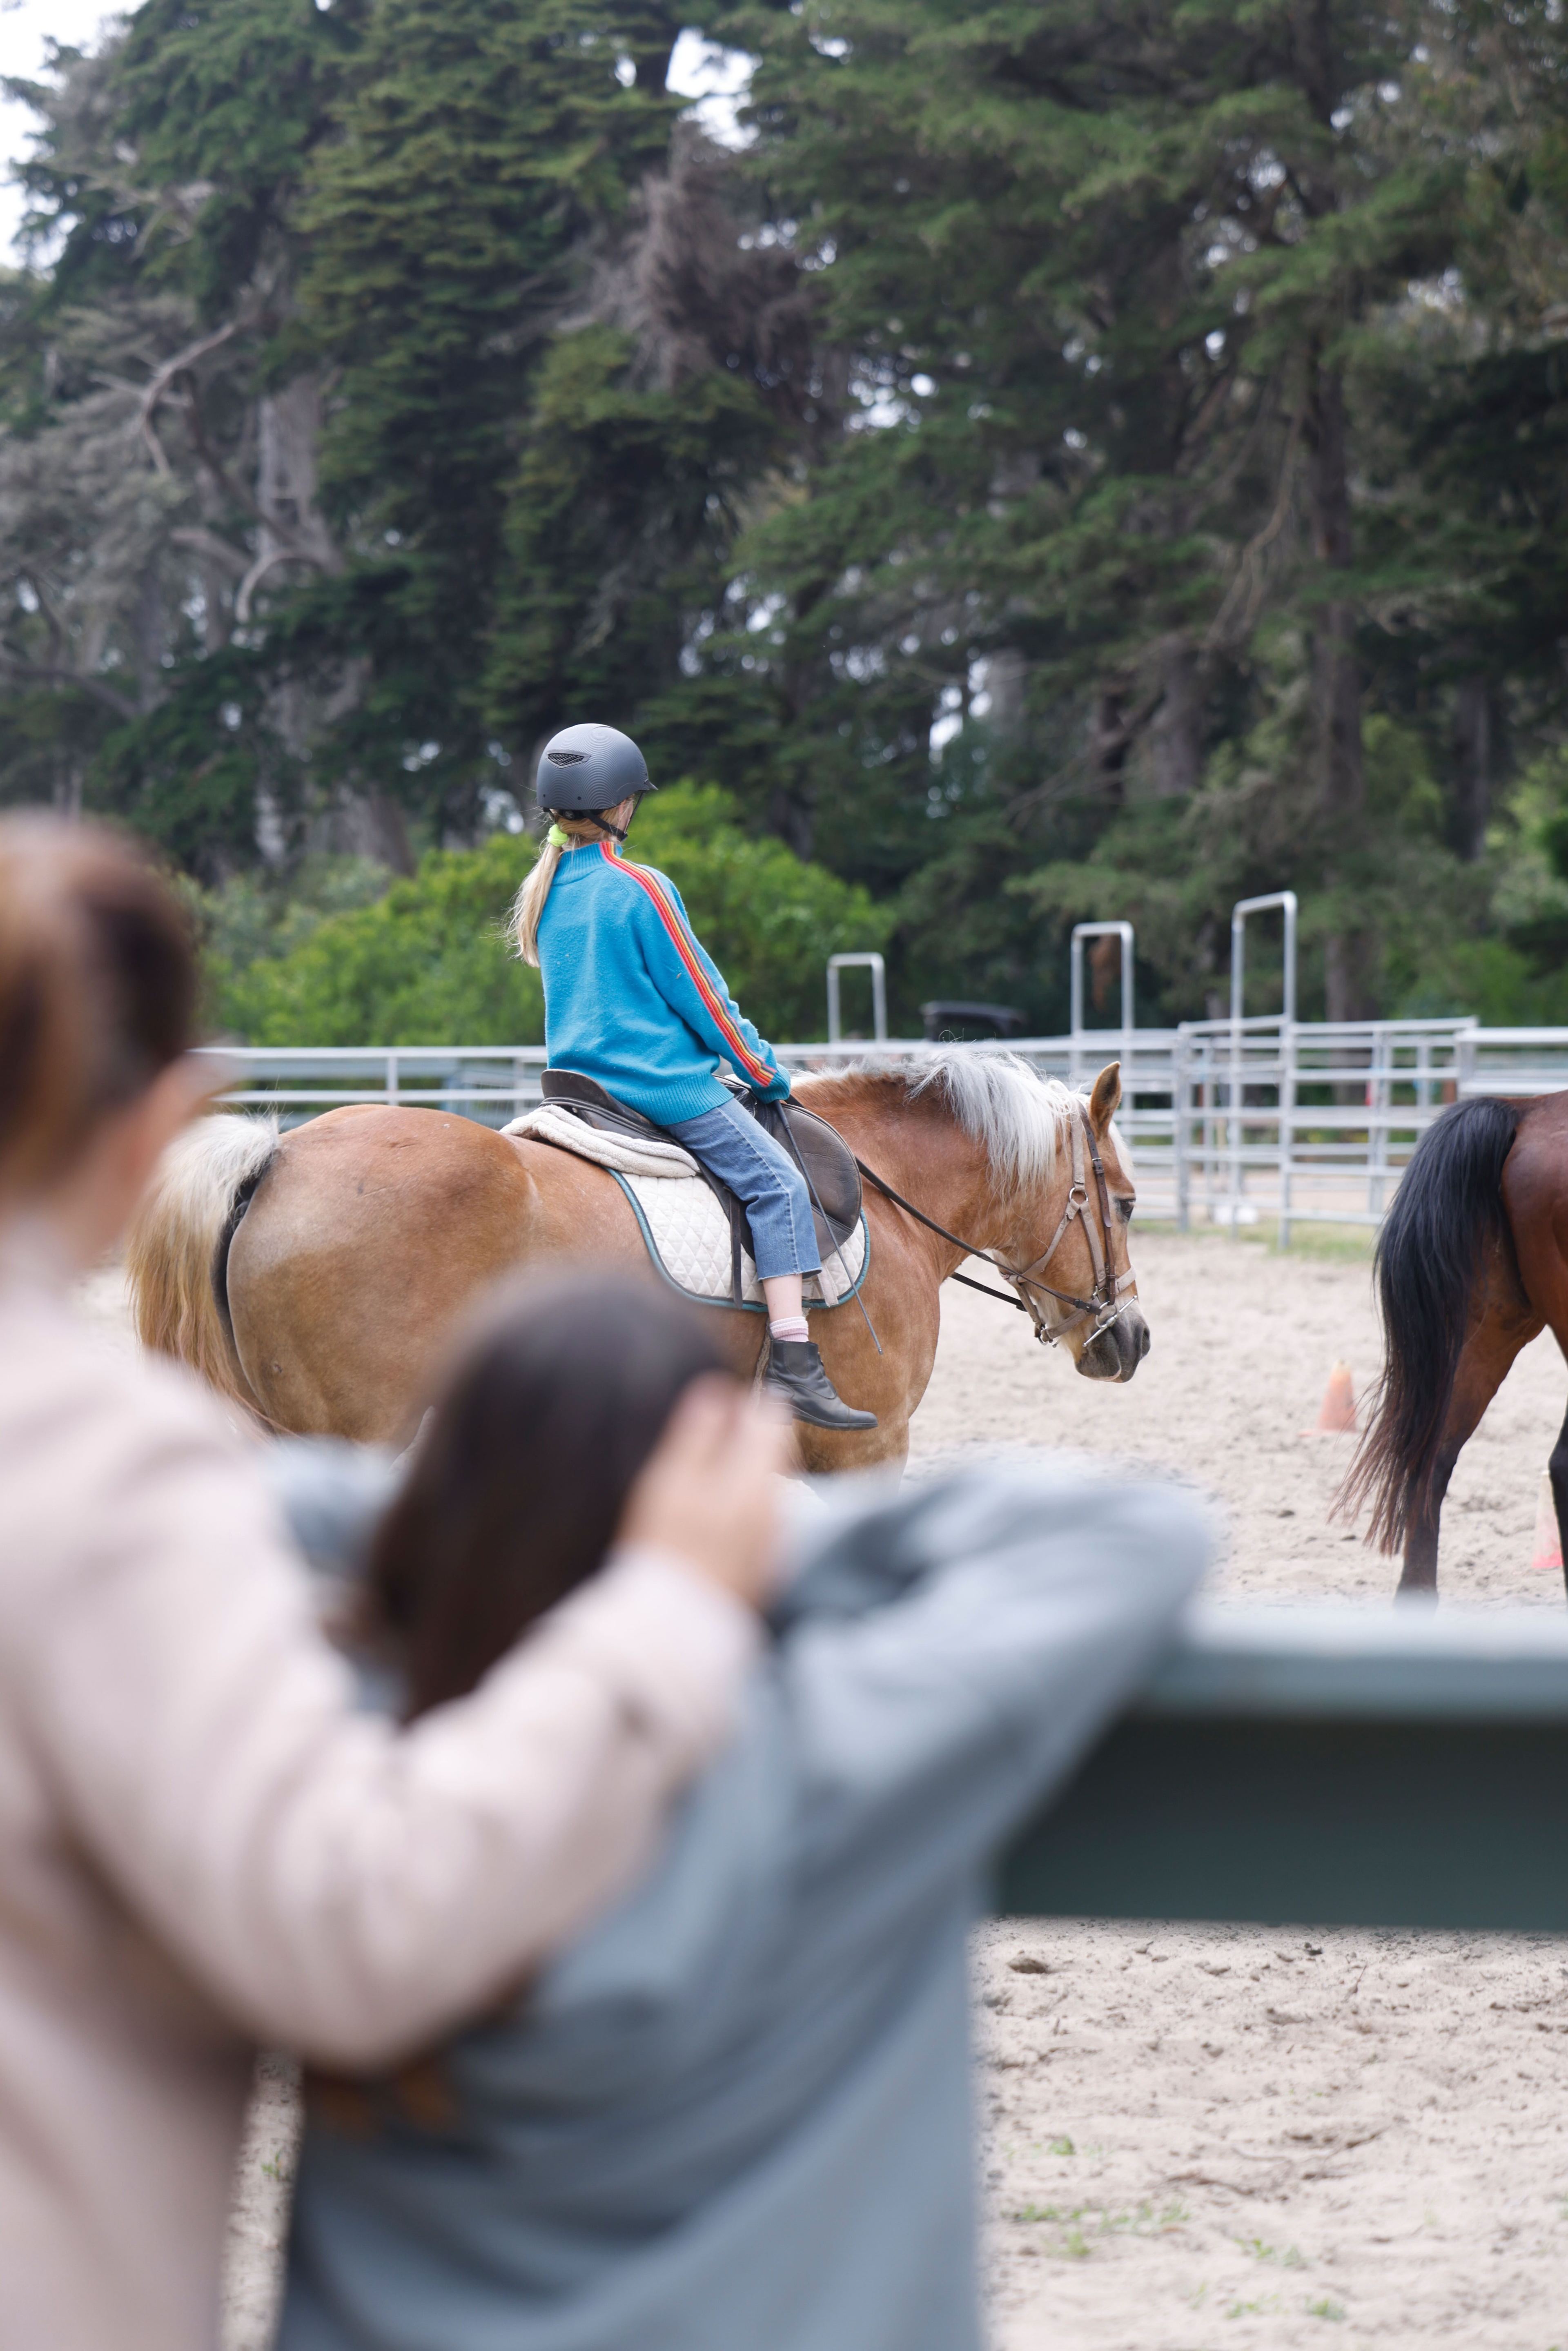 A person wearing a helmet rides a horse in a sandy area, while another person in the foreground watches. The background shows trees and a fenced area.